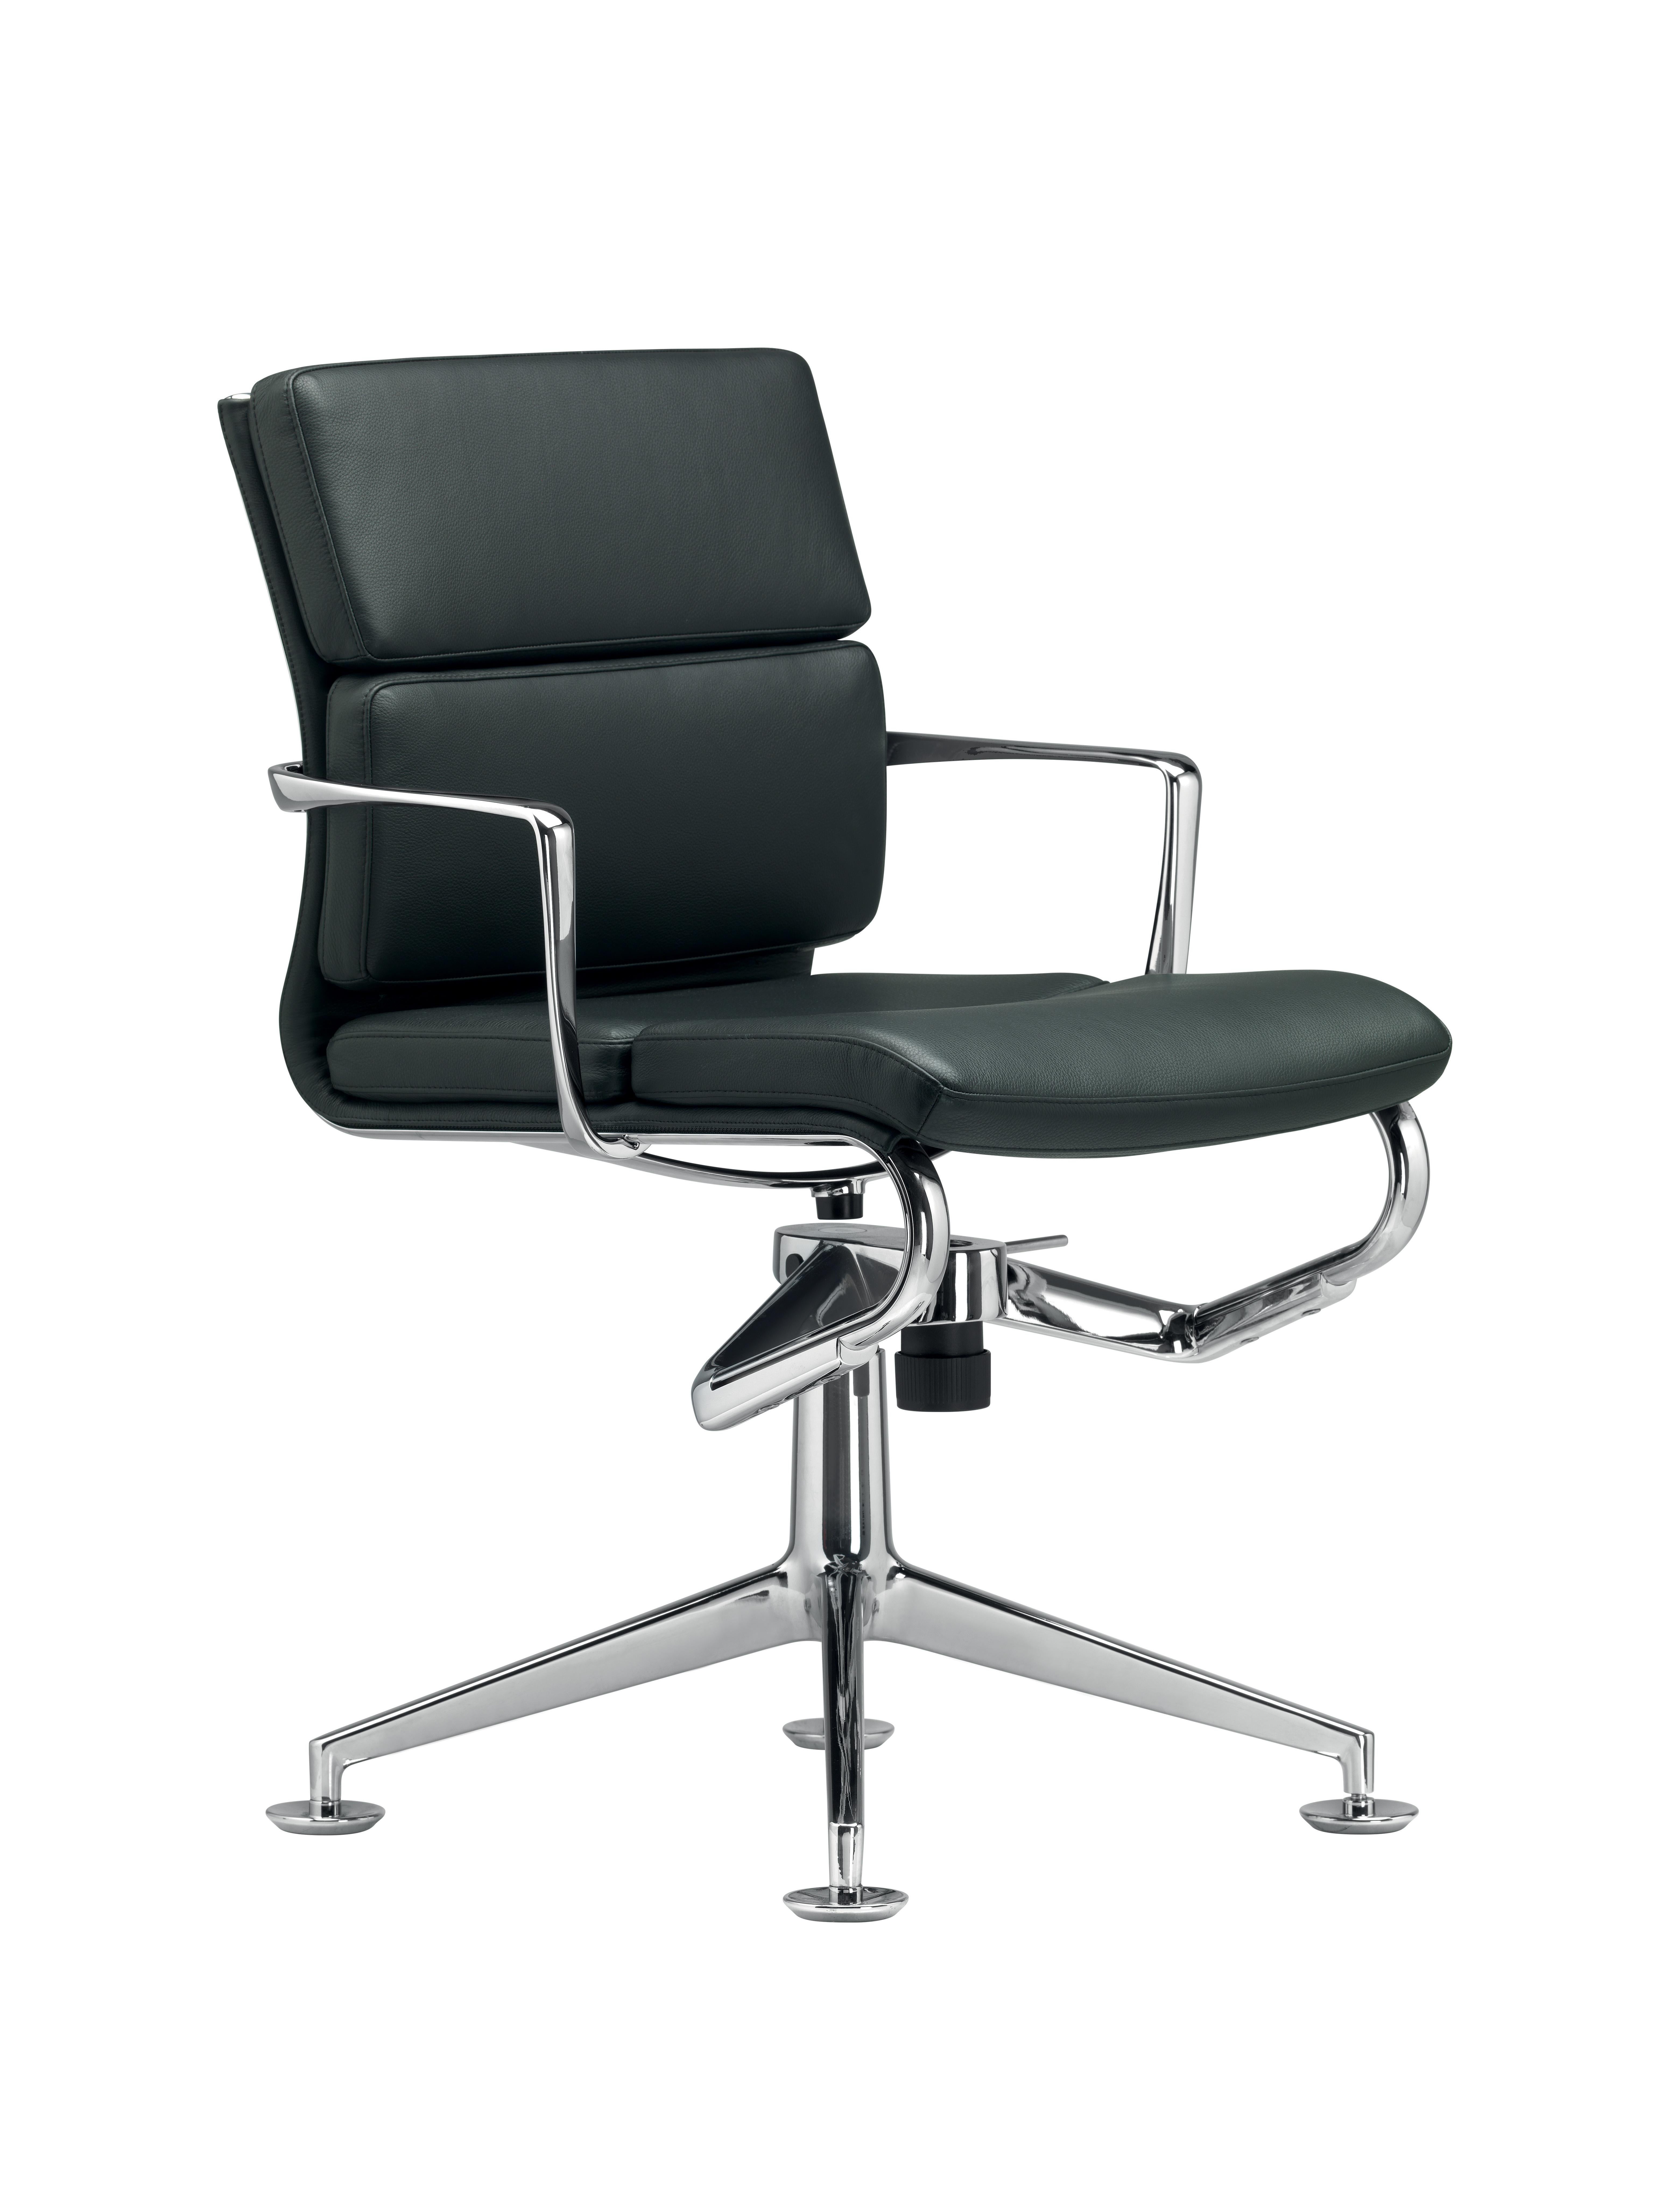 Alias 429 Meetingframe+ Tilt 47 Soft Chair in Black Seat with Chromed Frame by Alberto Meda

Swivel chair with arms and 4-star base with glides and tilting mechanism. Structure made of extruded aluminium profiles and die-cast aluminium elements.